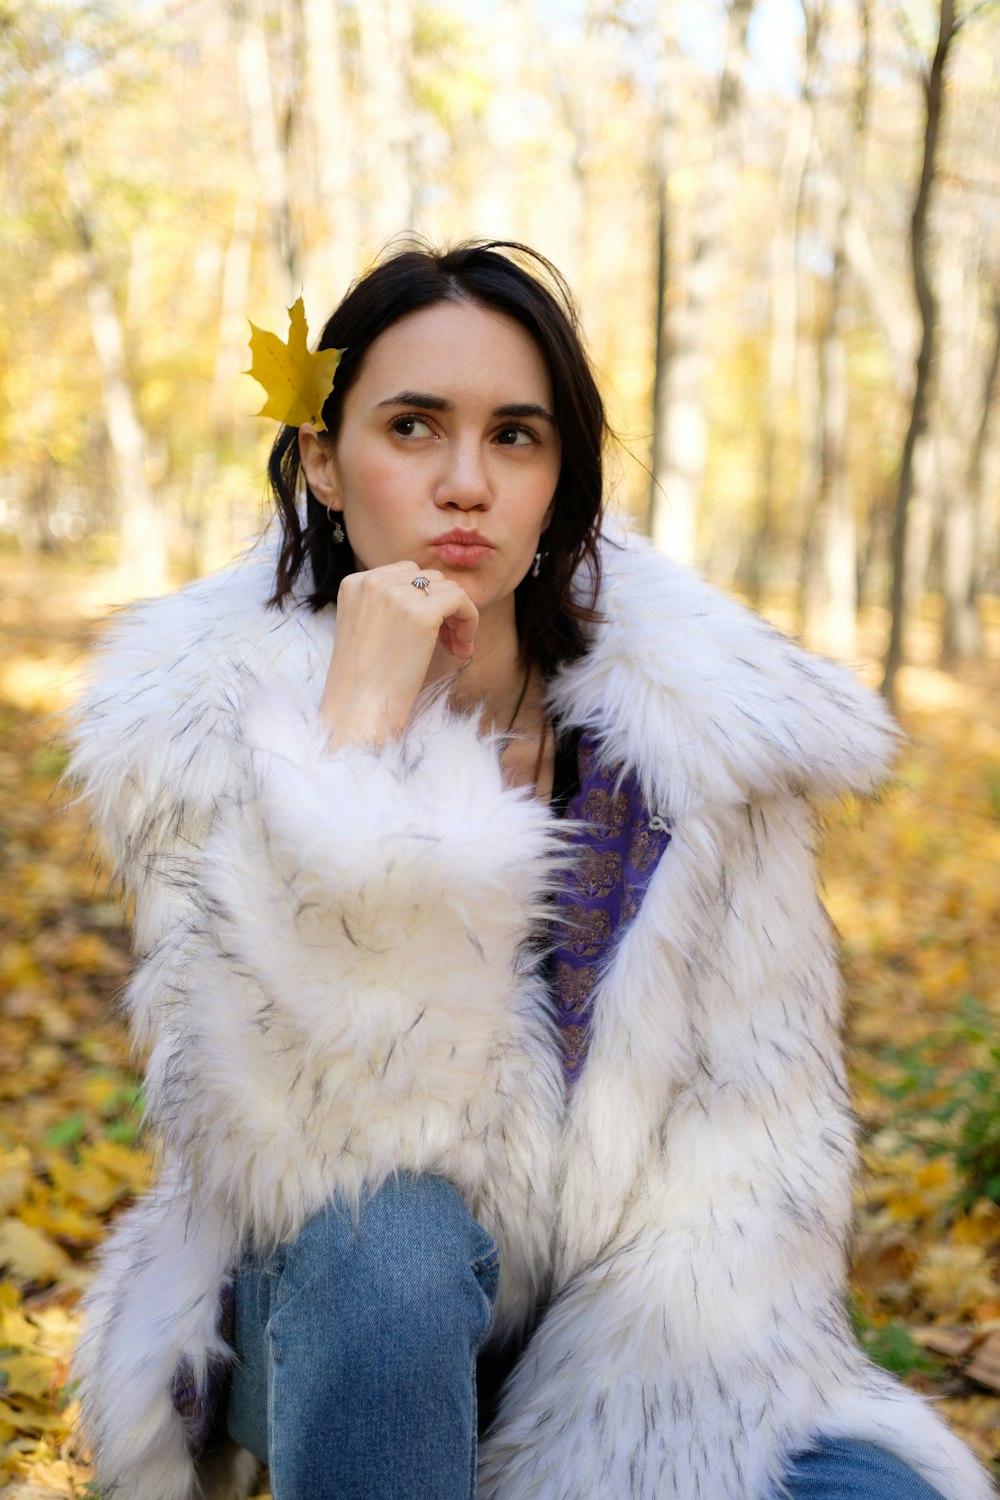 shallow focus photo of woman in white fur jacket